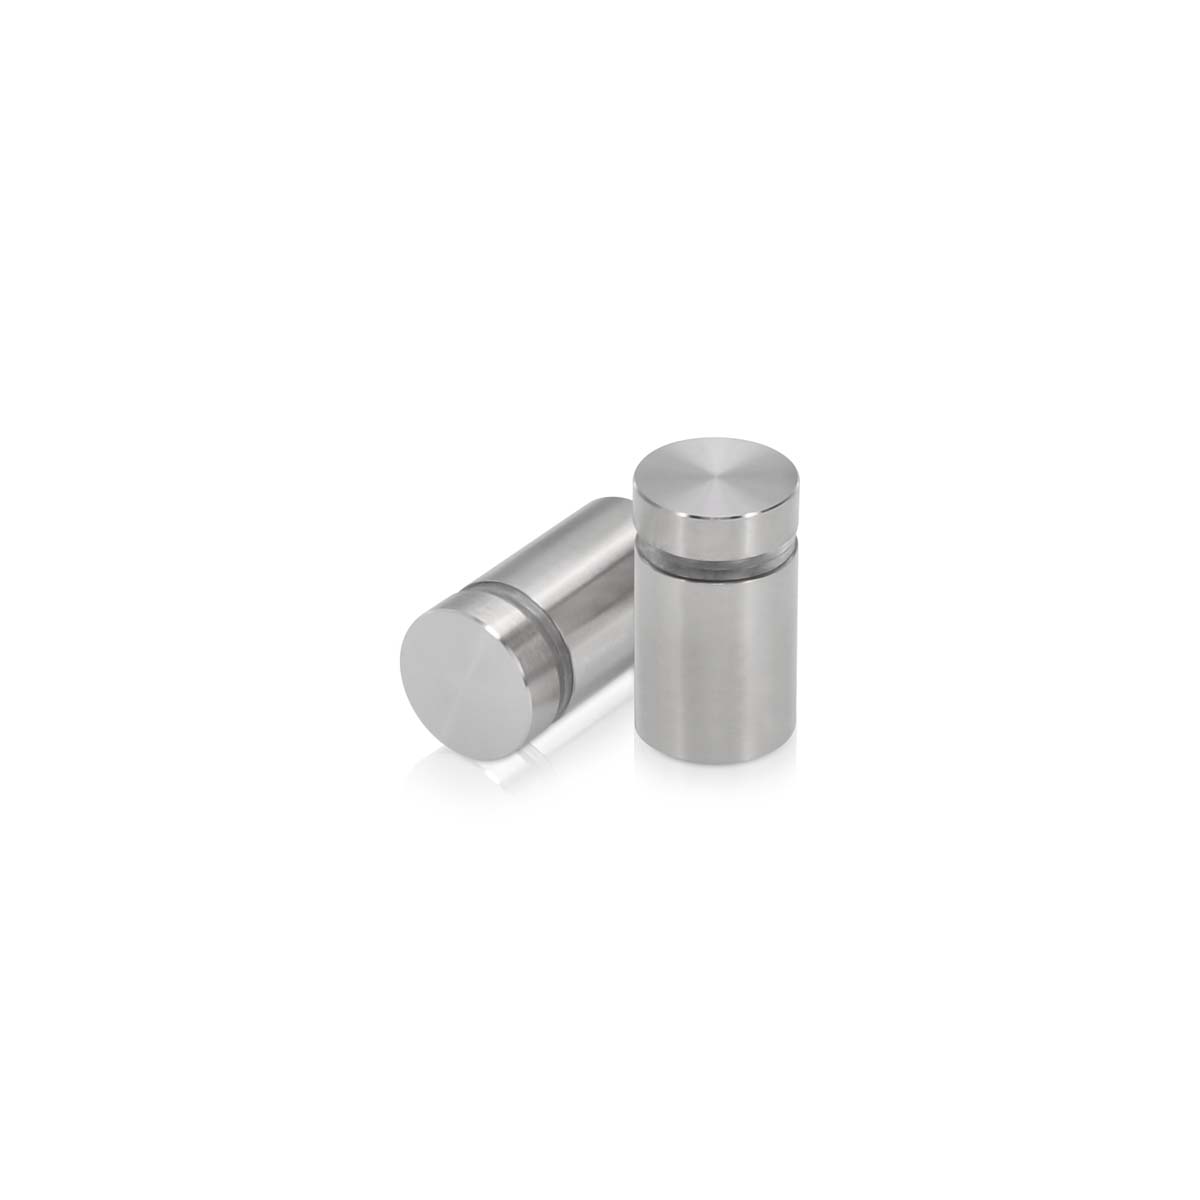 5/8'' Diameter X 1/2'' Barrel Length, Stainless Steel Brushed Finish. Easy Fasten Standoff (For Inside Use Only) [Required Material Hole Size: 7/16'']